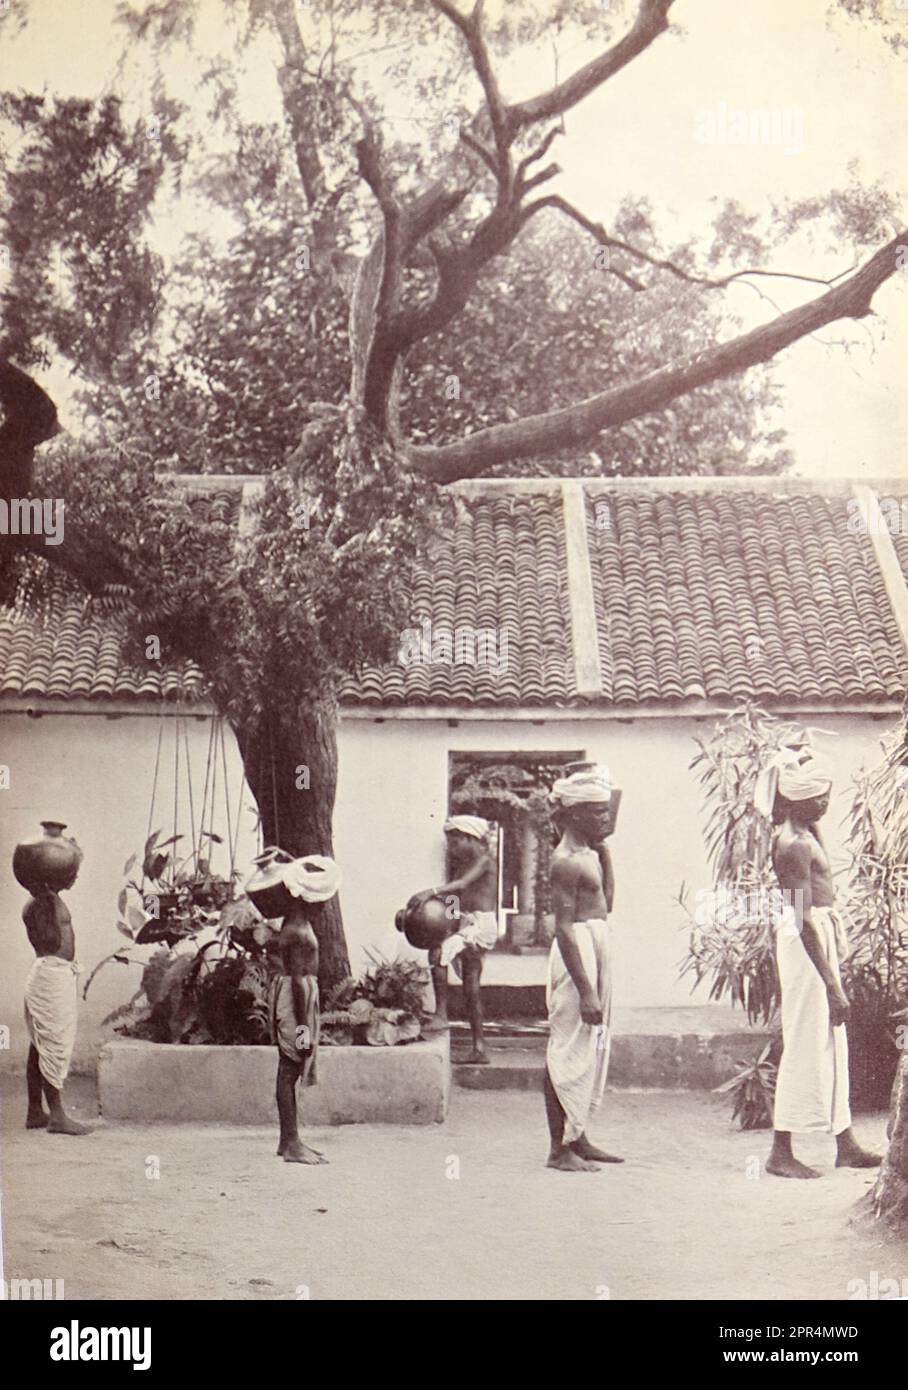 The water carriers: A task for which men had recently accepted responsibility in Dohnavur. Half-tone engraving from a photograph by Mr. Penn of Ootacamund (now known as Ooto), in the Tamil Nadu region of Southern India, c1912. The image relates to the Church of England Zenana Mission’s nursery and compound in Dohnavur, also in Tamil Nadu and about thirty miles from the southern tip of India. The compound was run by Amy Wilson-Carmichael and sought to promote Christianity among babies and children (at the time only girls, many who were victims of temple prostitution). Stock Photo